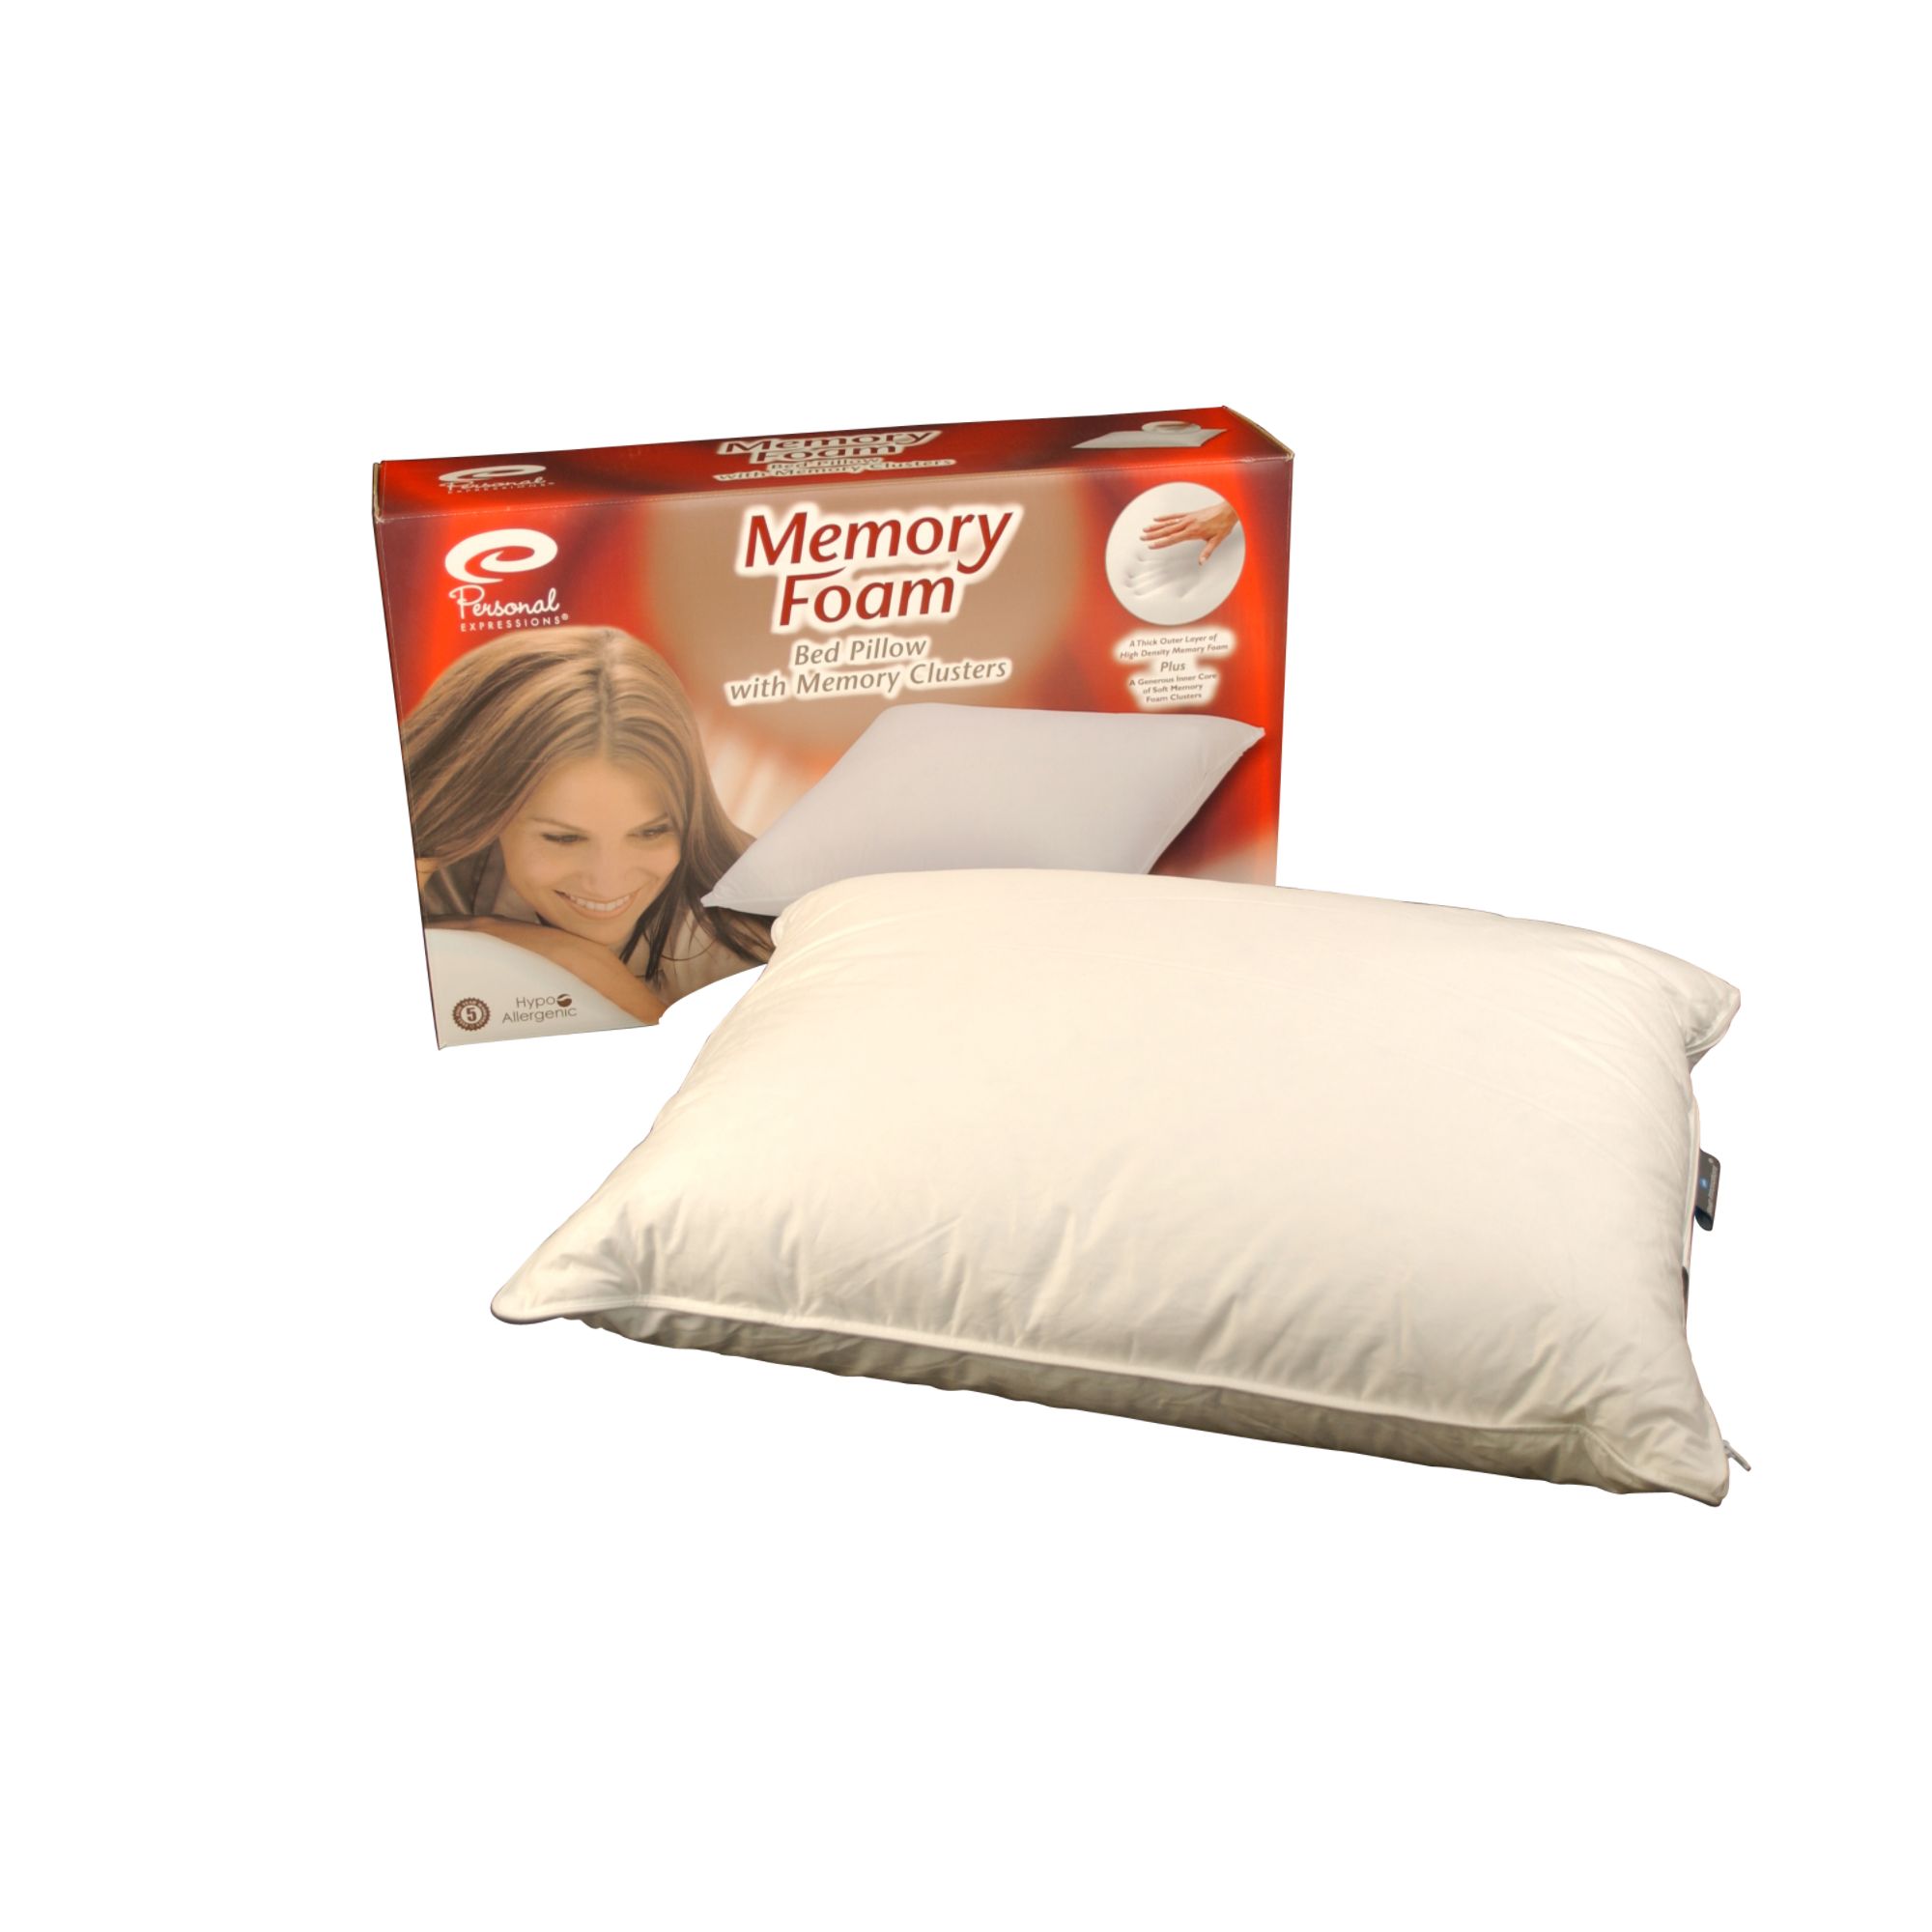 Personal Expressions Memory Foam Pillow with Memory Clusters